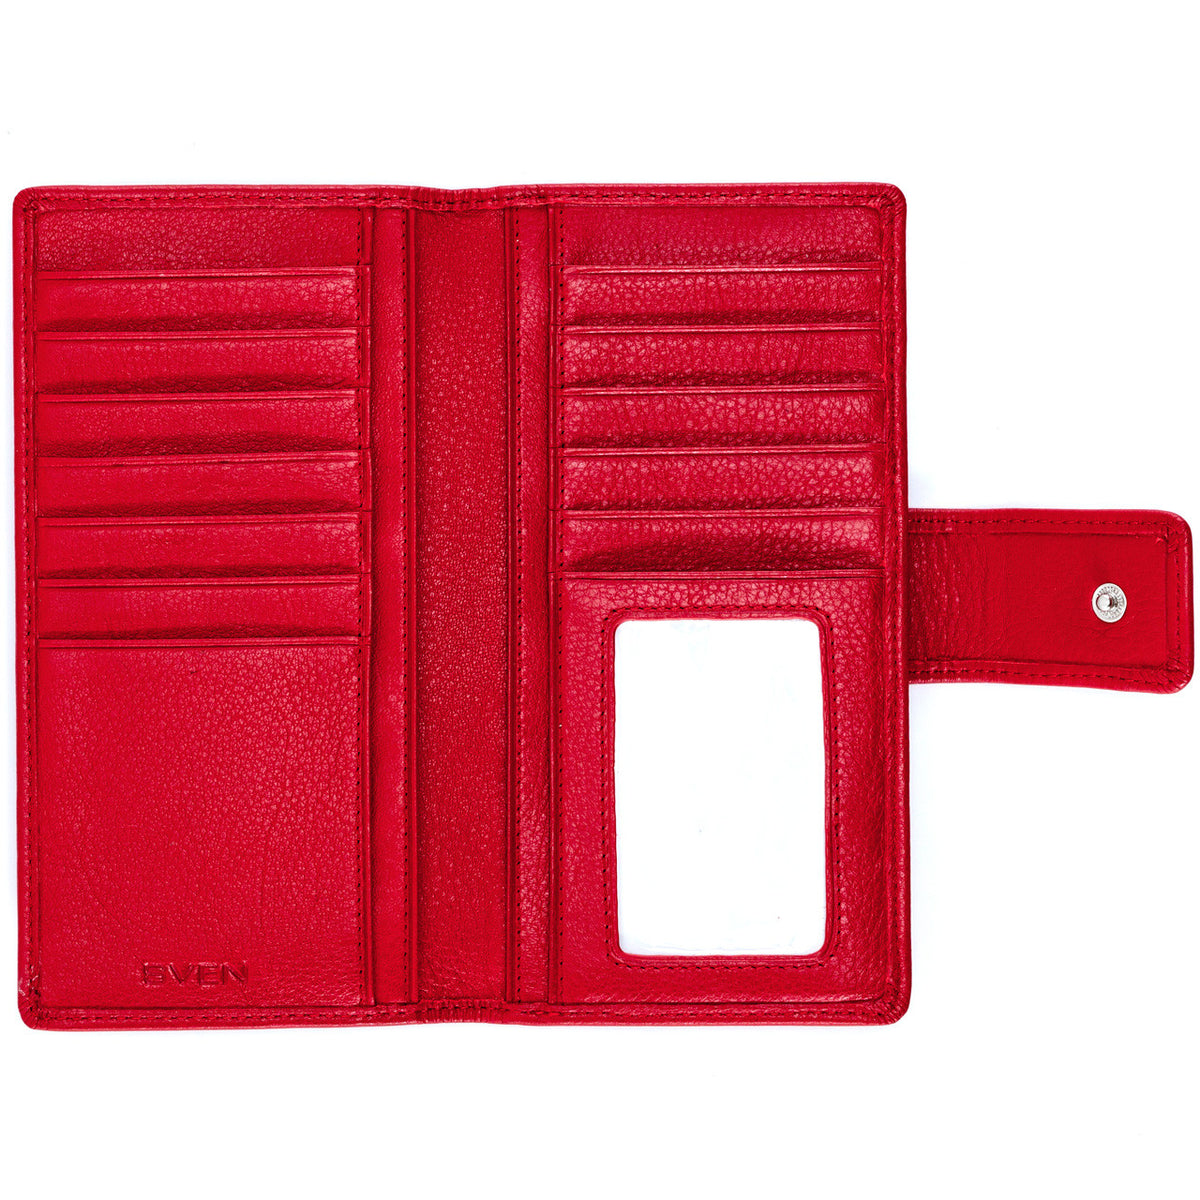 SVEN Style No. W58 Wallet red leather